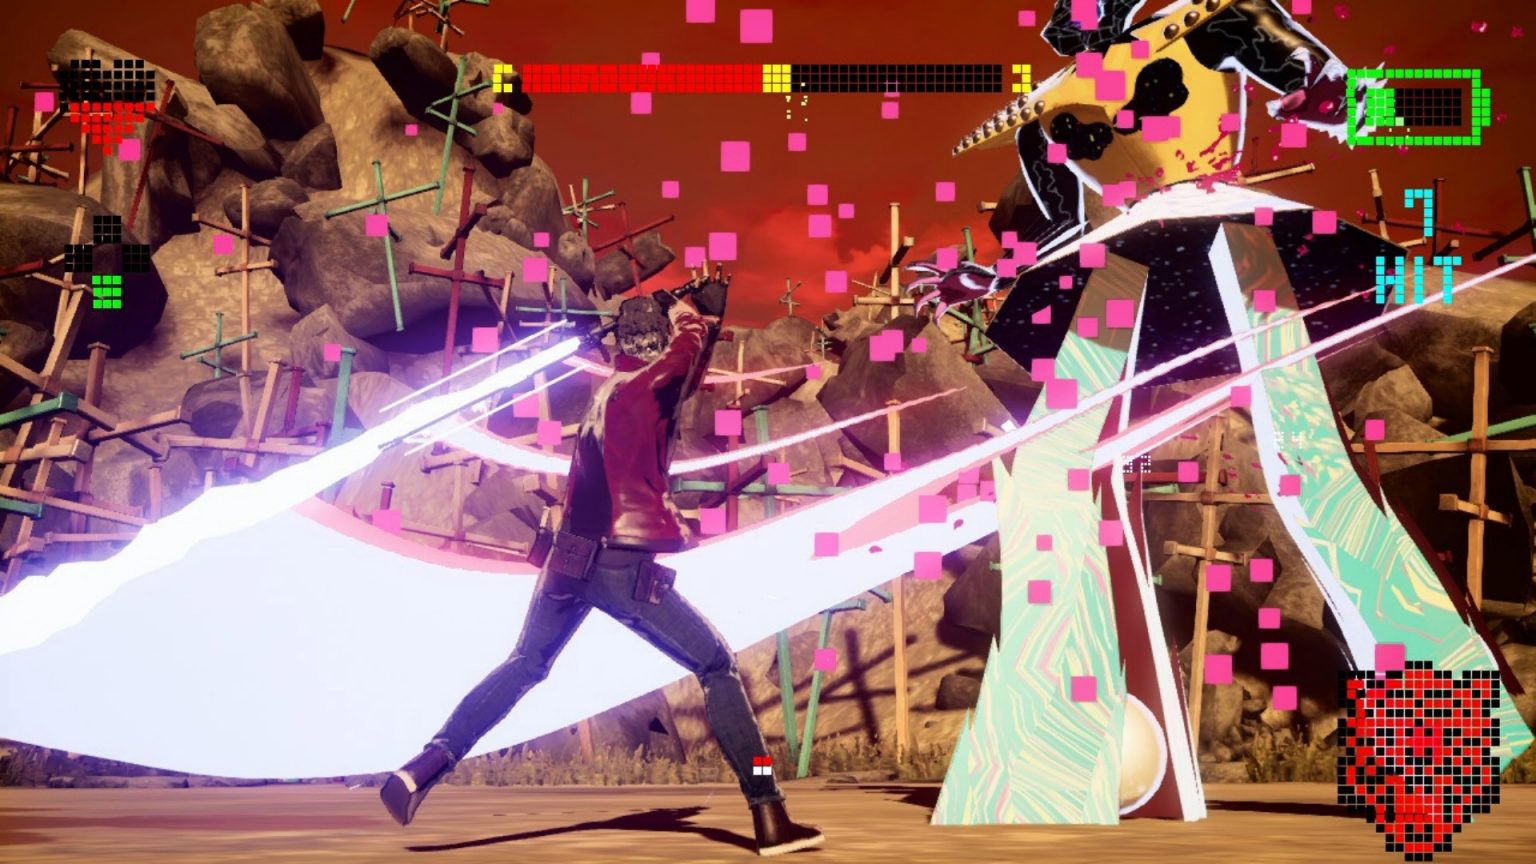 download no more heroes 3 steam